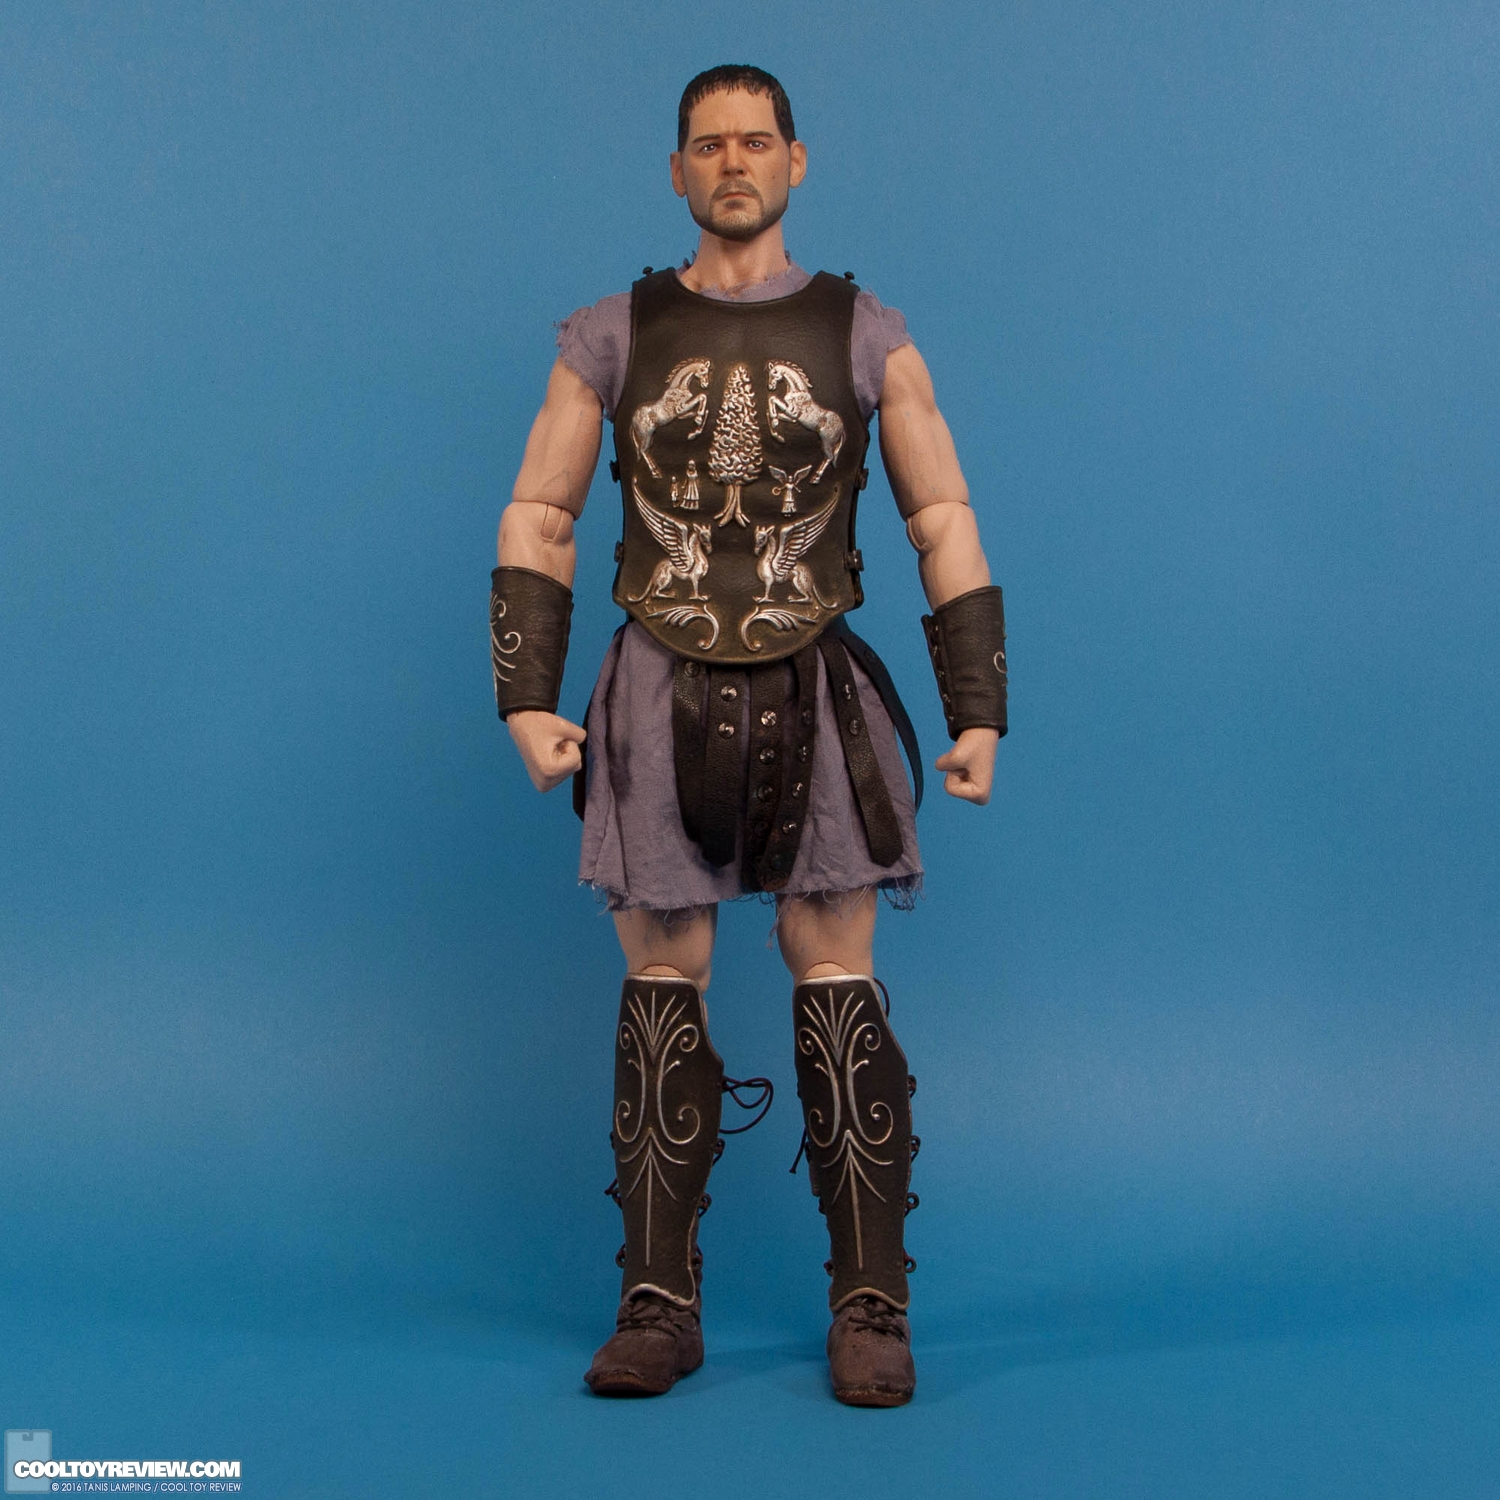 pangaea-toy-gladiator-general-sixth-scale-collectible-figure-017.jpg